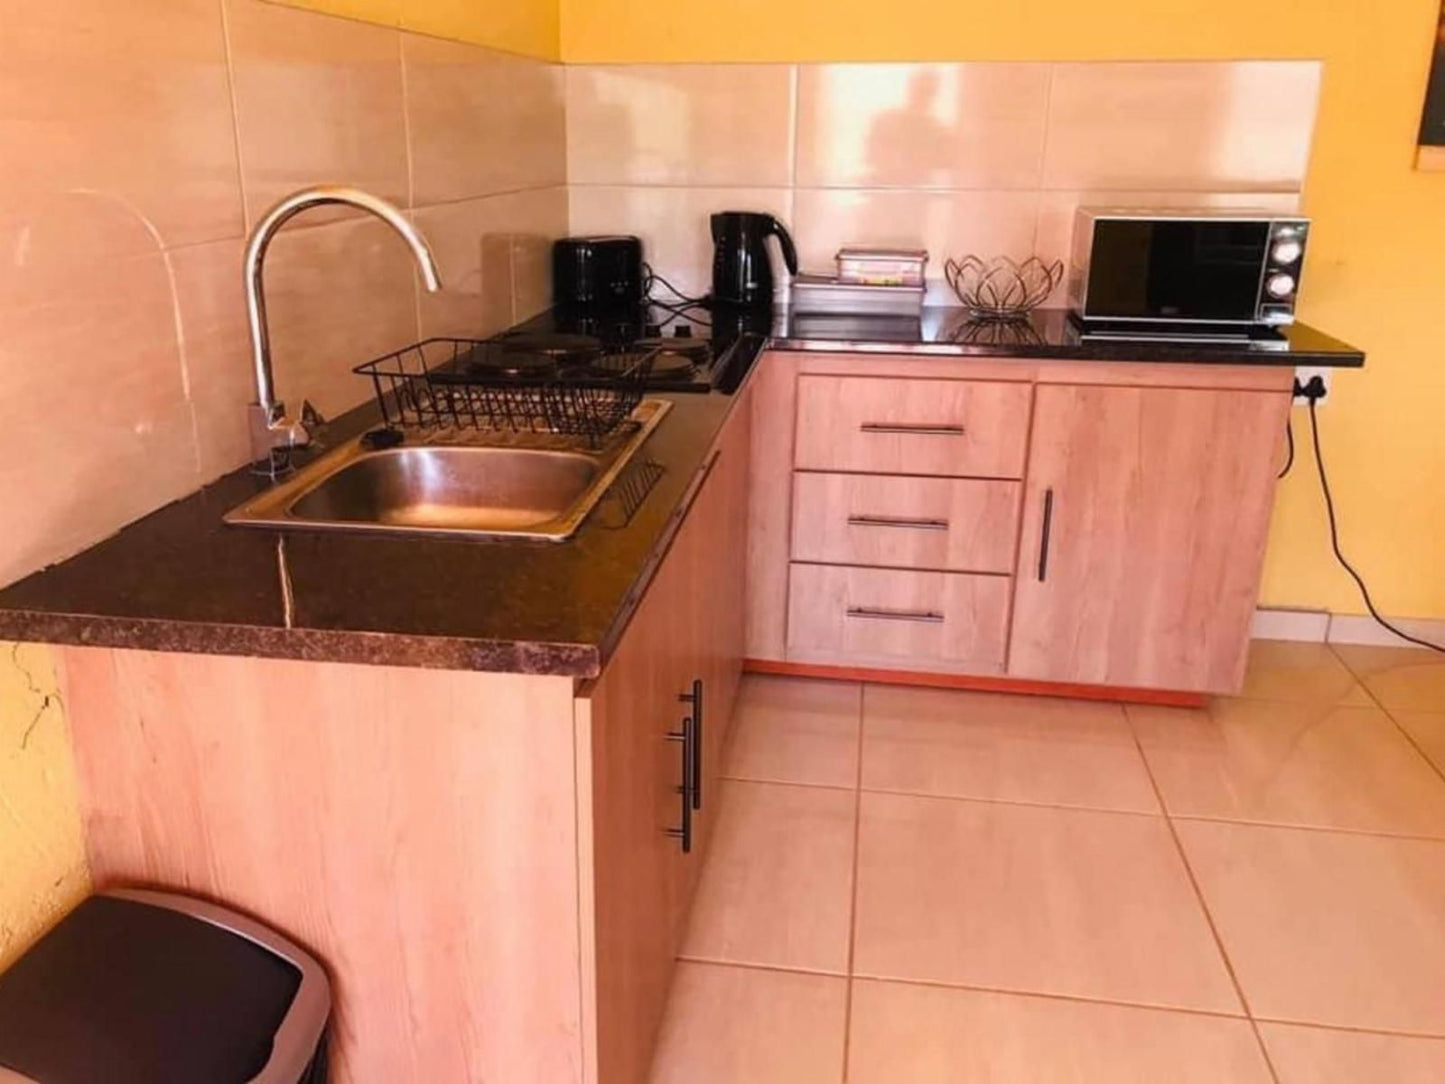 Tshinakie Self Catering Lodge Thohoyandou Limpopo Province South Africa Colorful, Kitchen